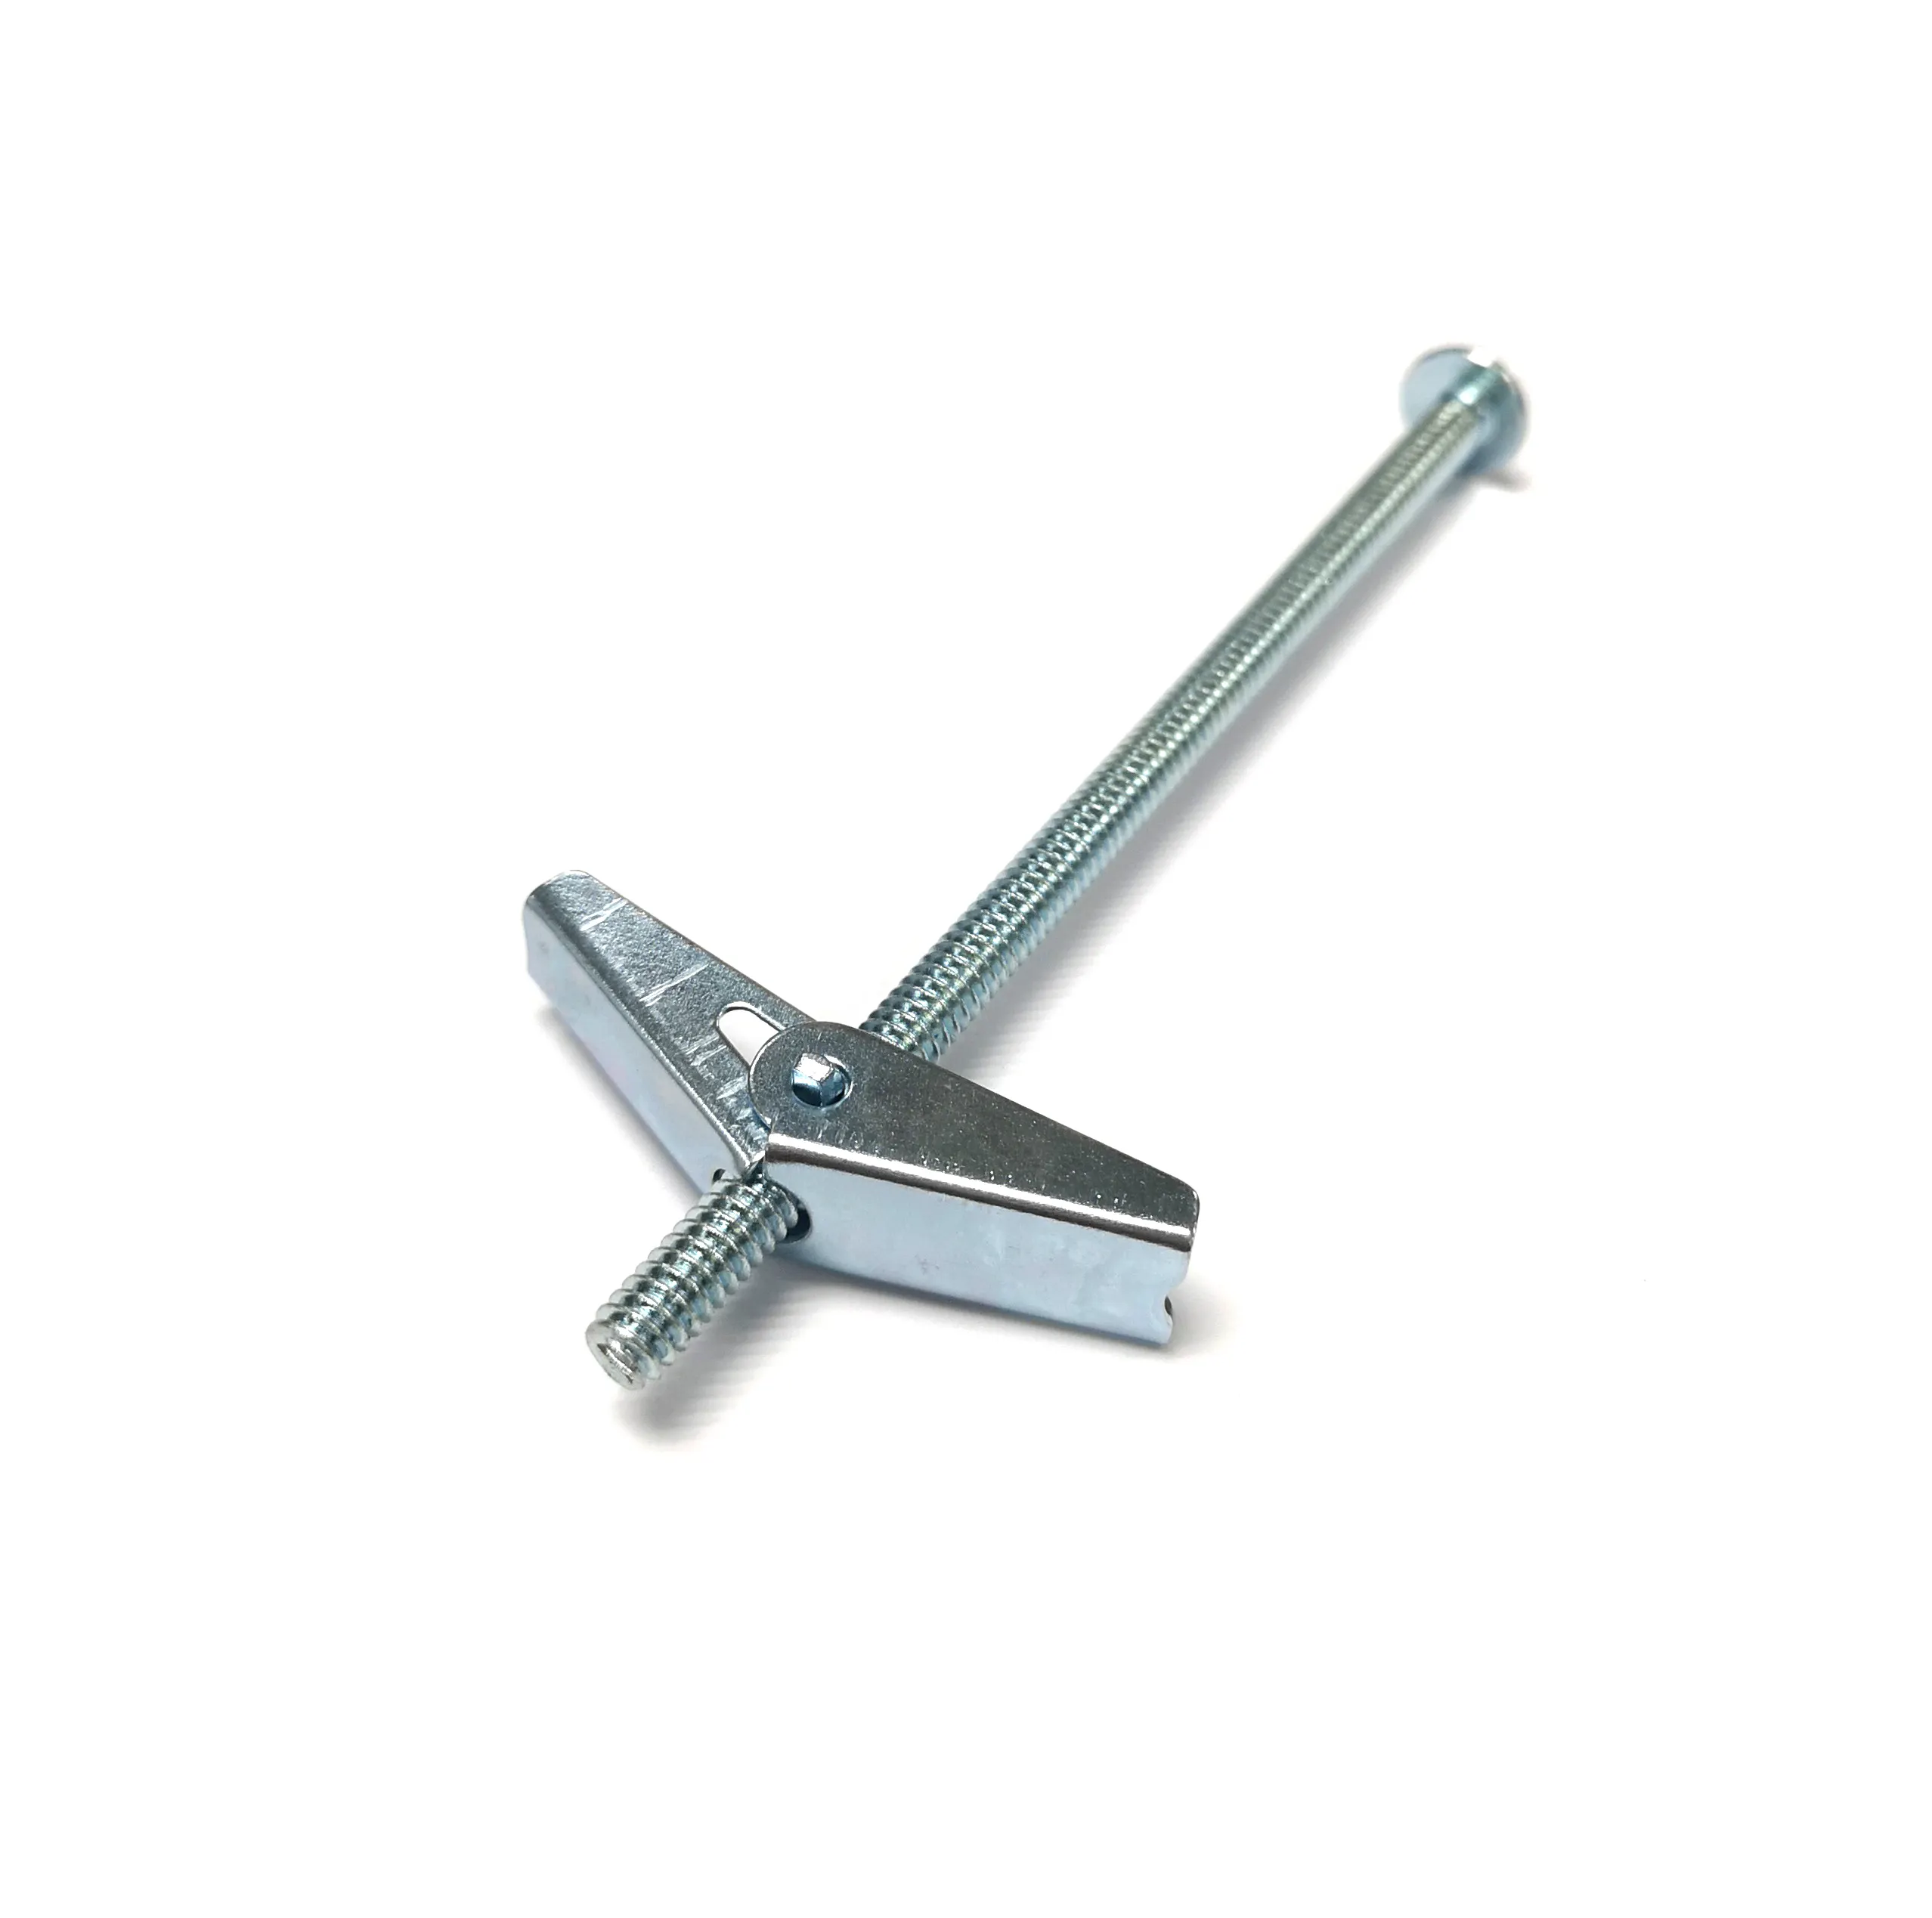 Factory Price Heavy Duty Spring Toggle Bolts Anchors Drywall Anchors For Hanging Heavy Items on Drywall Inserted Bolt Wing Nuts